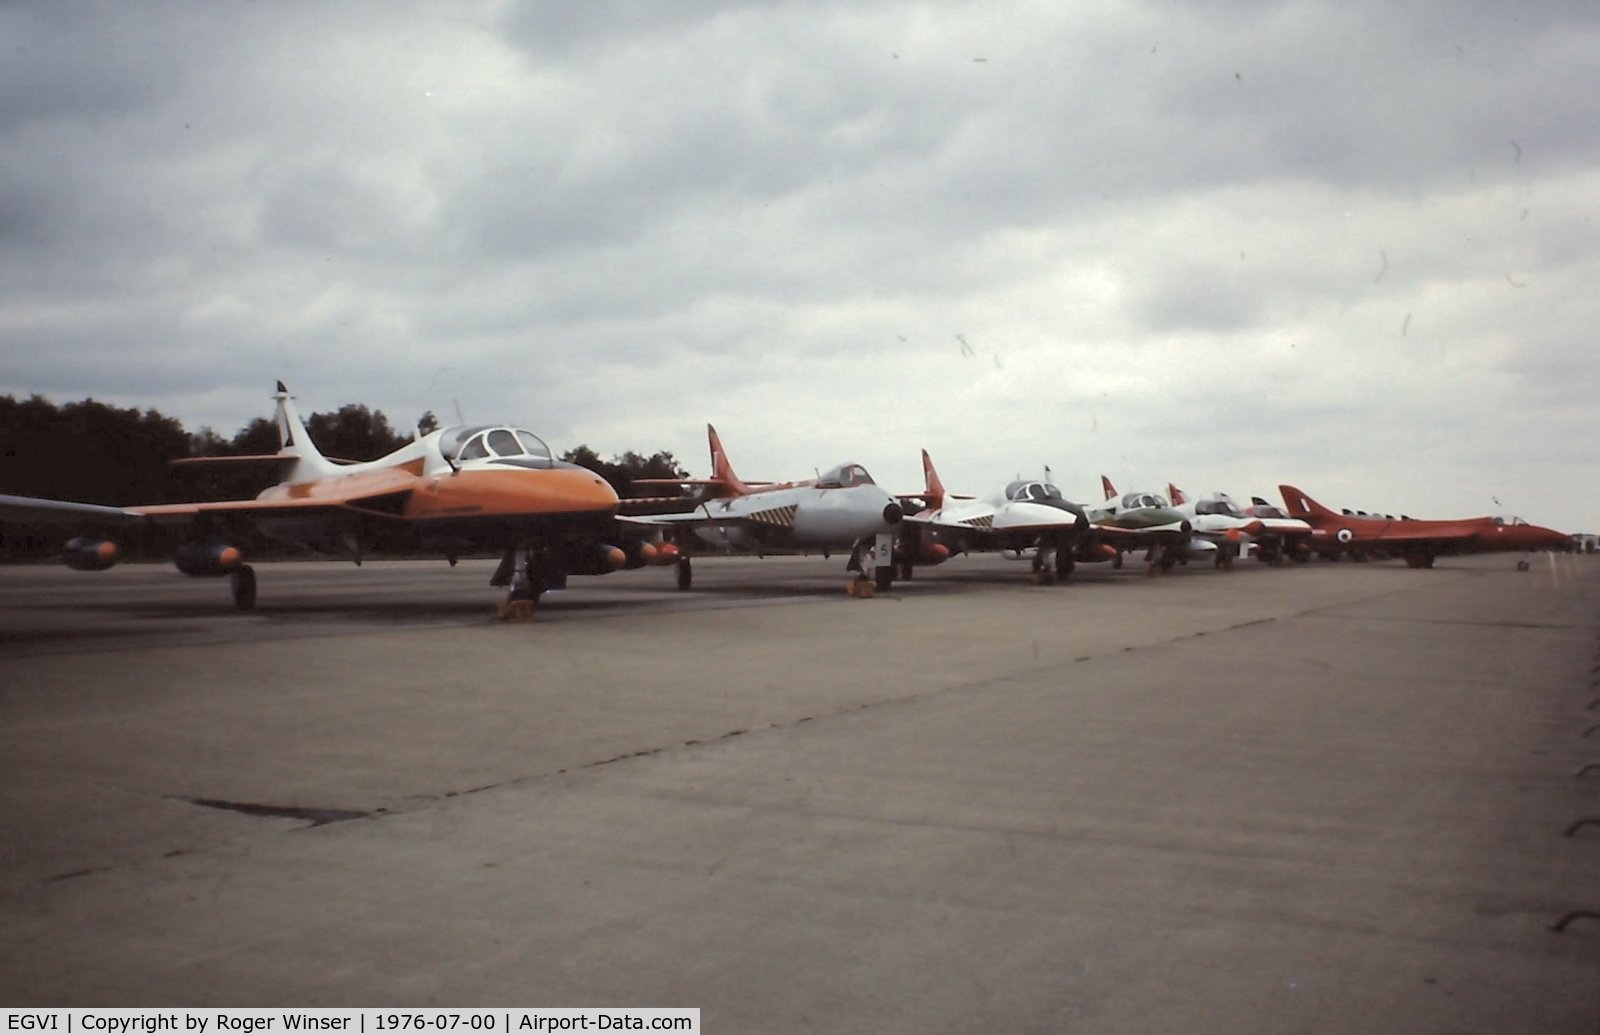 EGVI Airport - Line up of Hawker Hunters (including the prototype)
at IAT 76 held at RAF Greenham Common in July 1976. Celebrating 25 years since the first flight of the prototype on 20 July 1951.